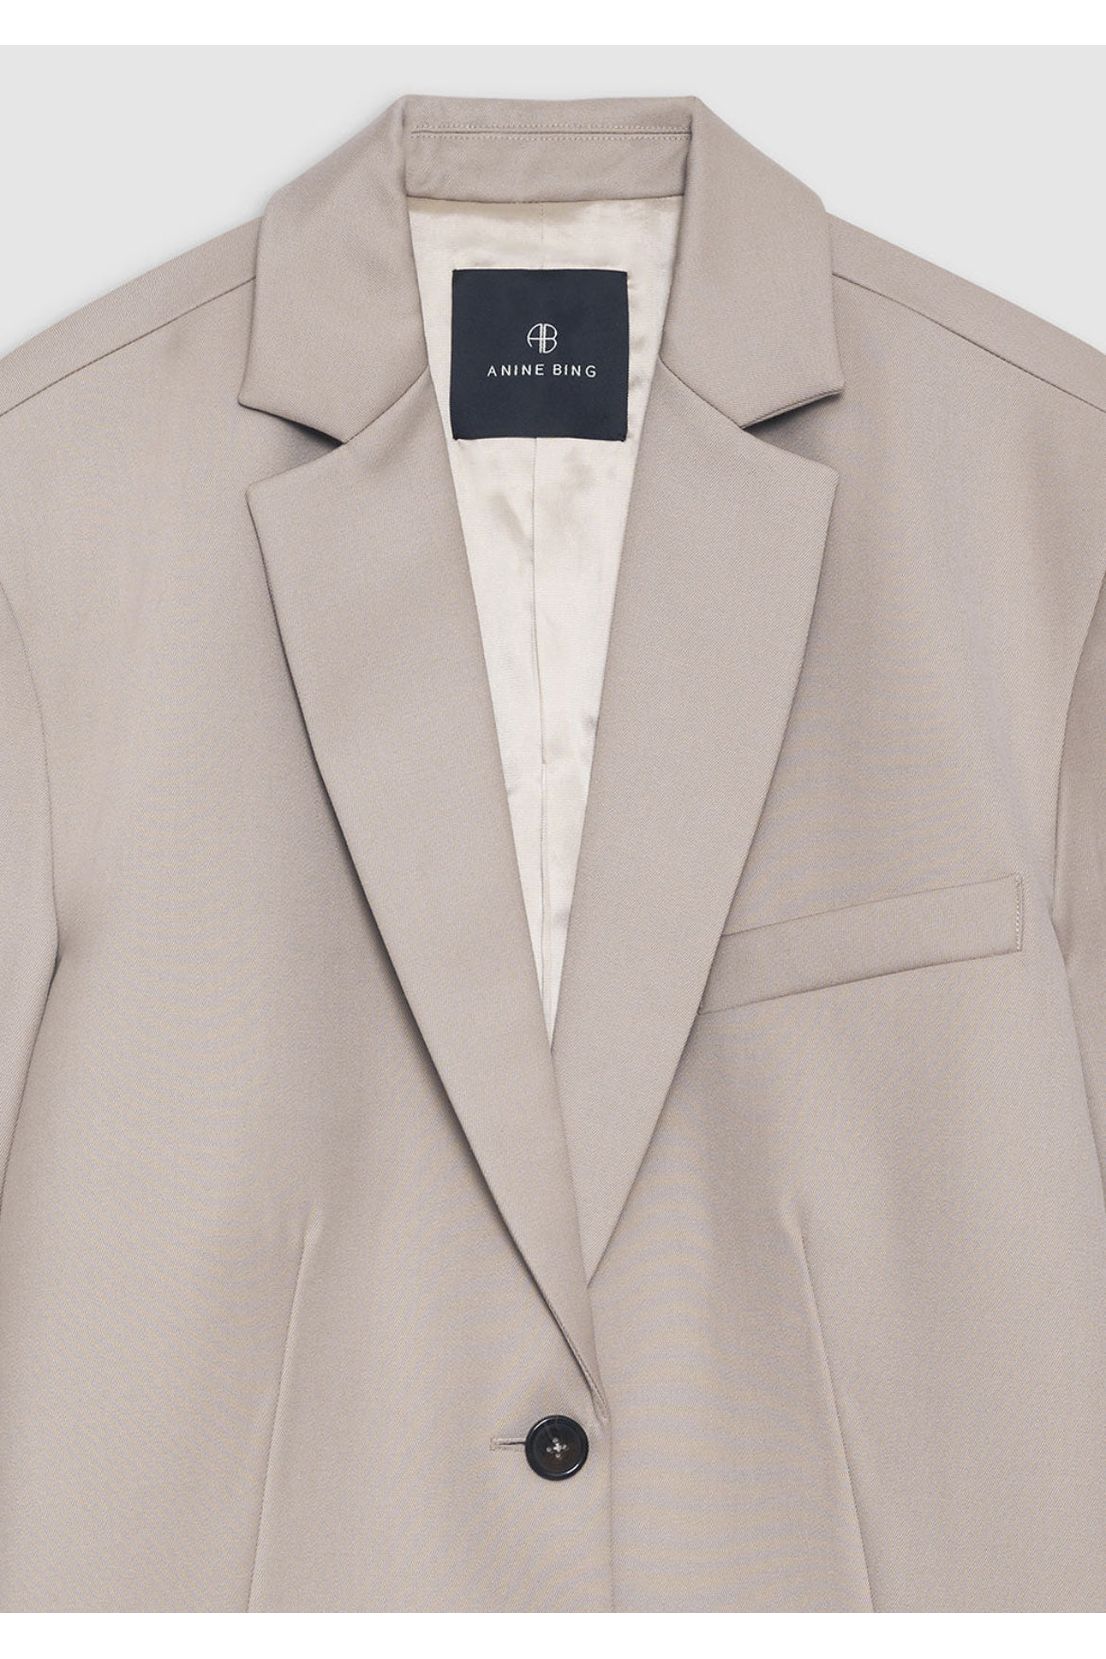 Quinn Blazer in Taupe by Anine Bing